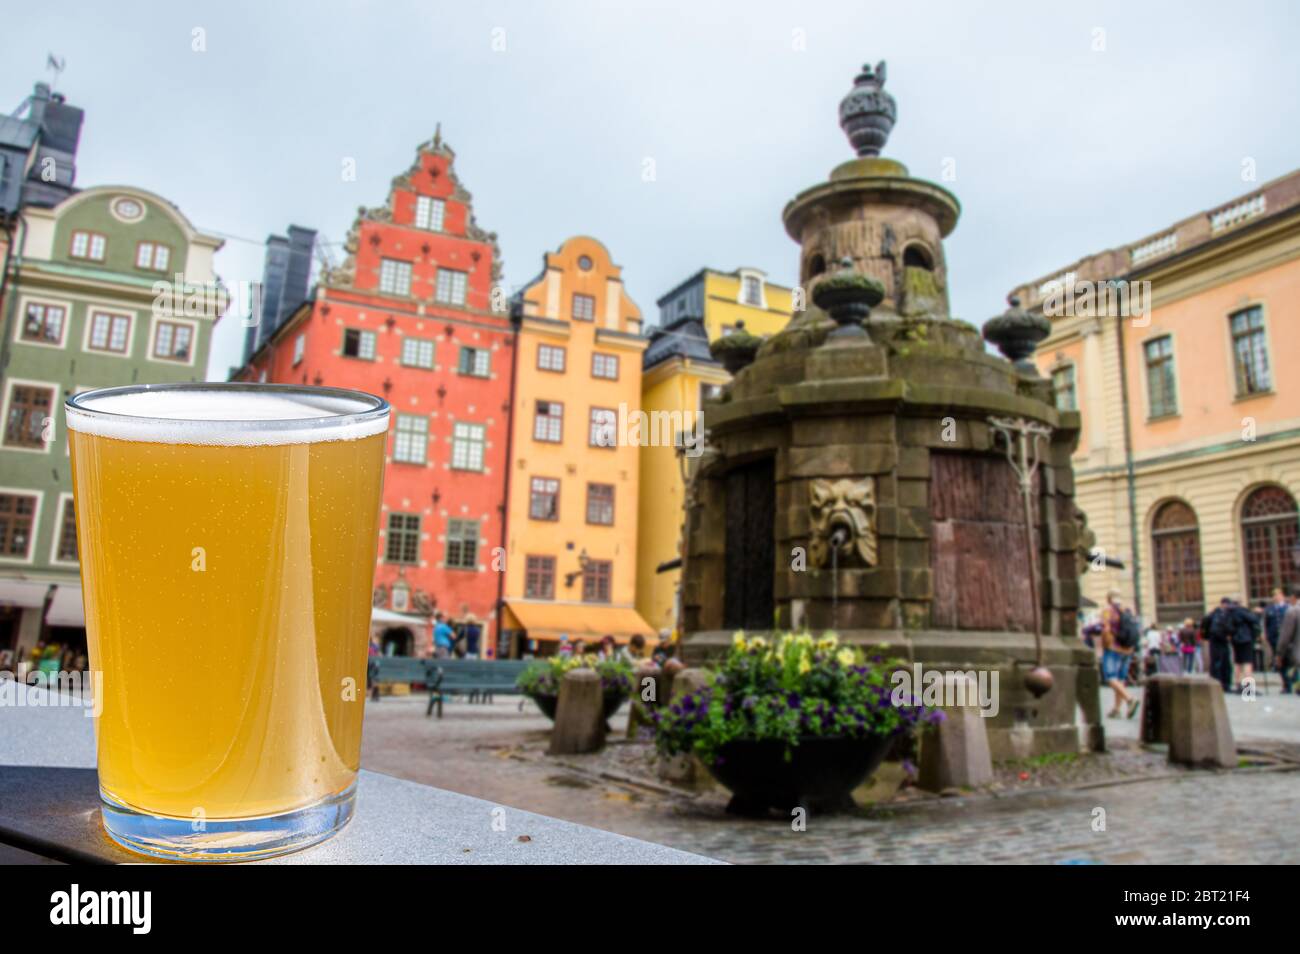 Glass of light beer against view of Stockholm city center on Gamla stan, Sweden. Stortorget in Old City, the Oldest Square in Stockholm Stock Photo